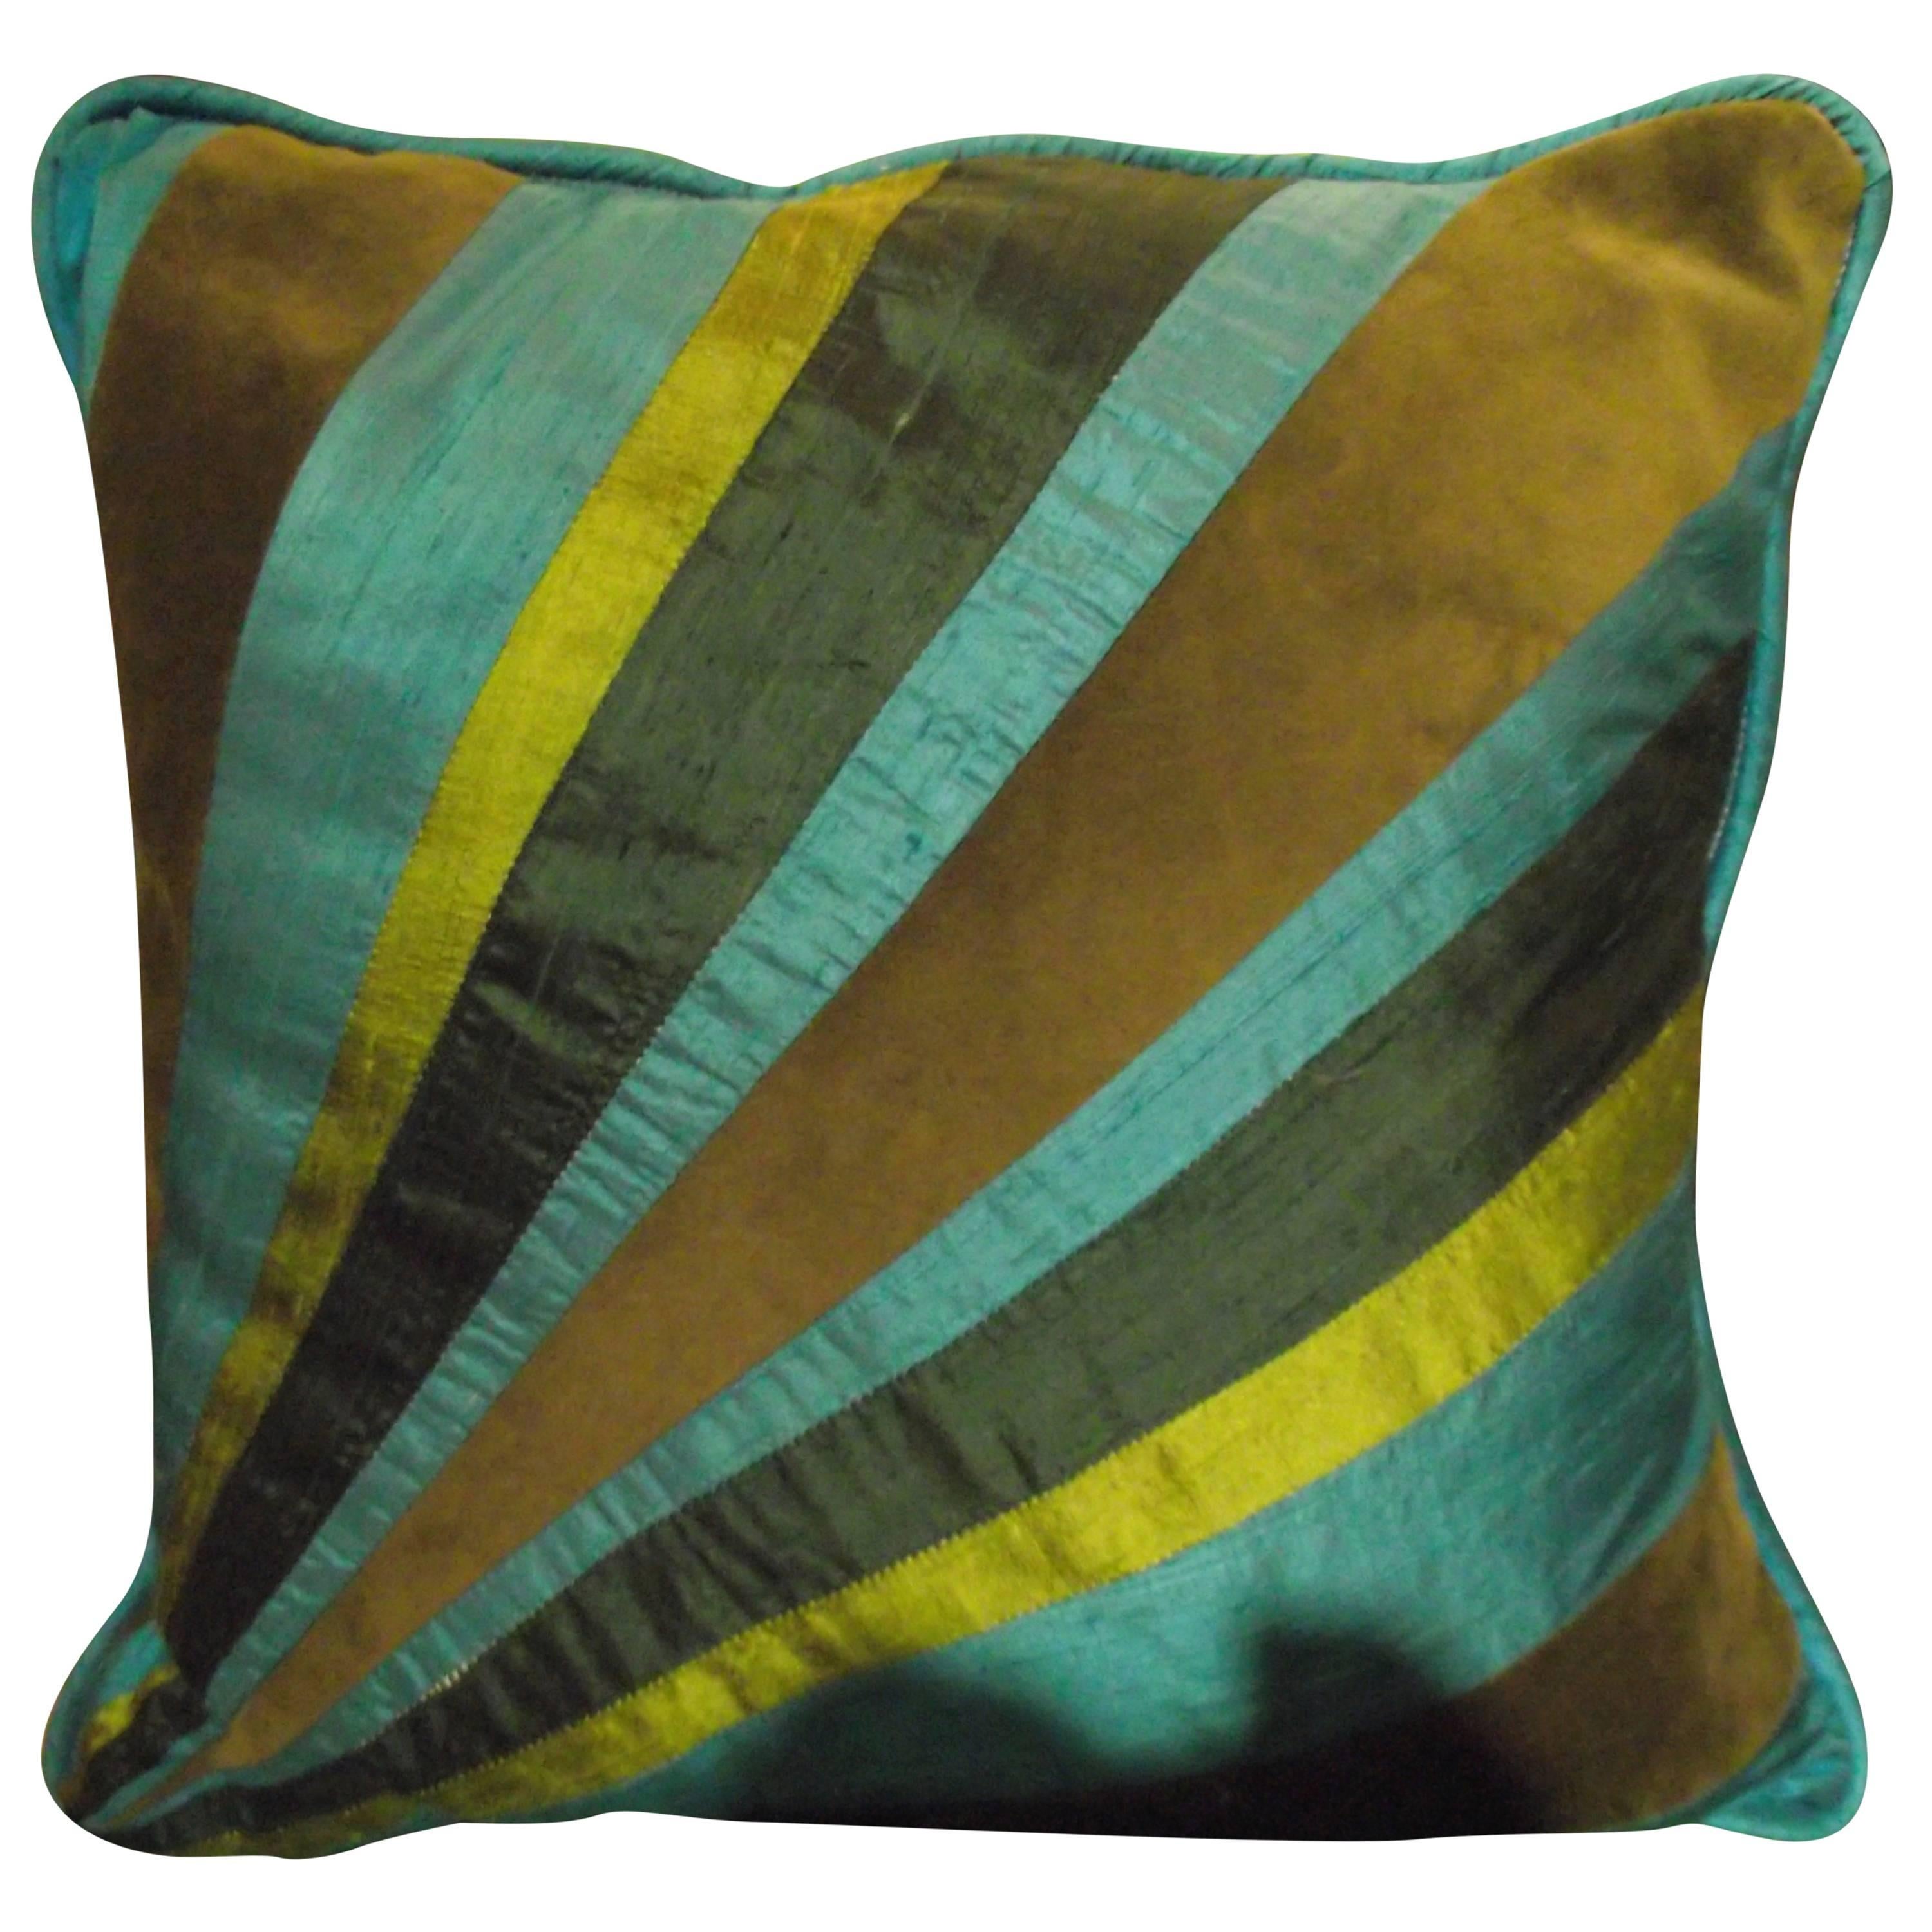 Throw Pillow of Turquoise Blue and Green Silk and Velvet In Diagonal Stripe  For Sale